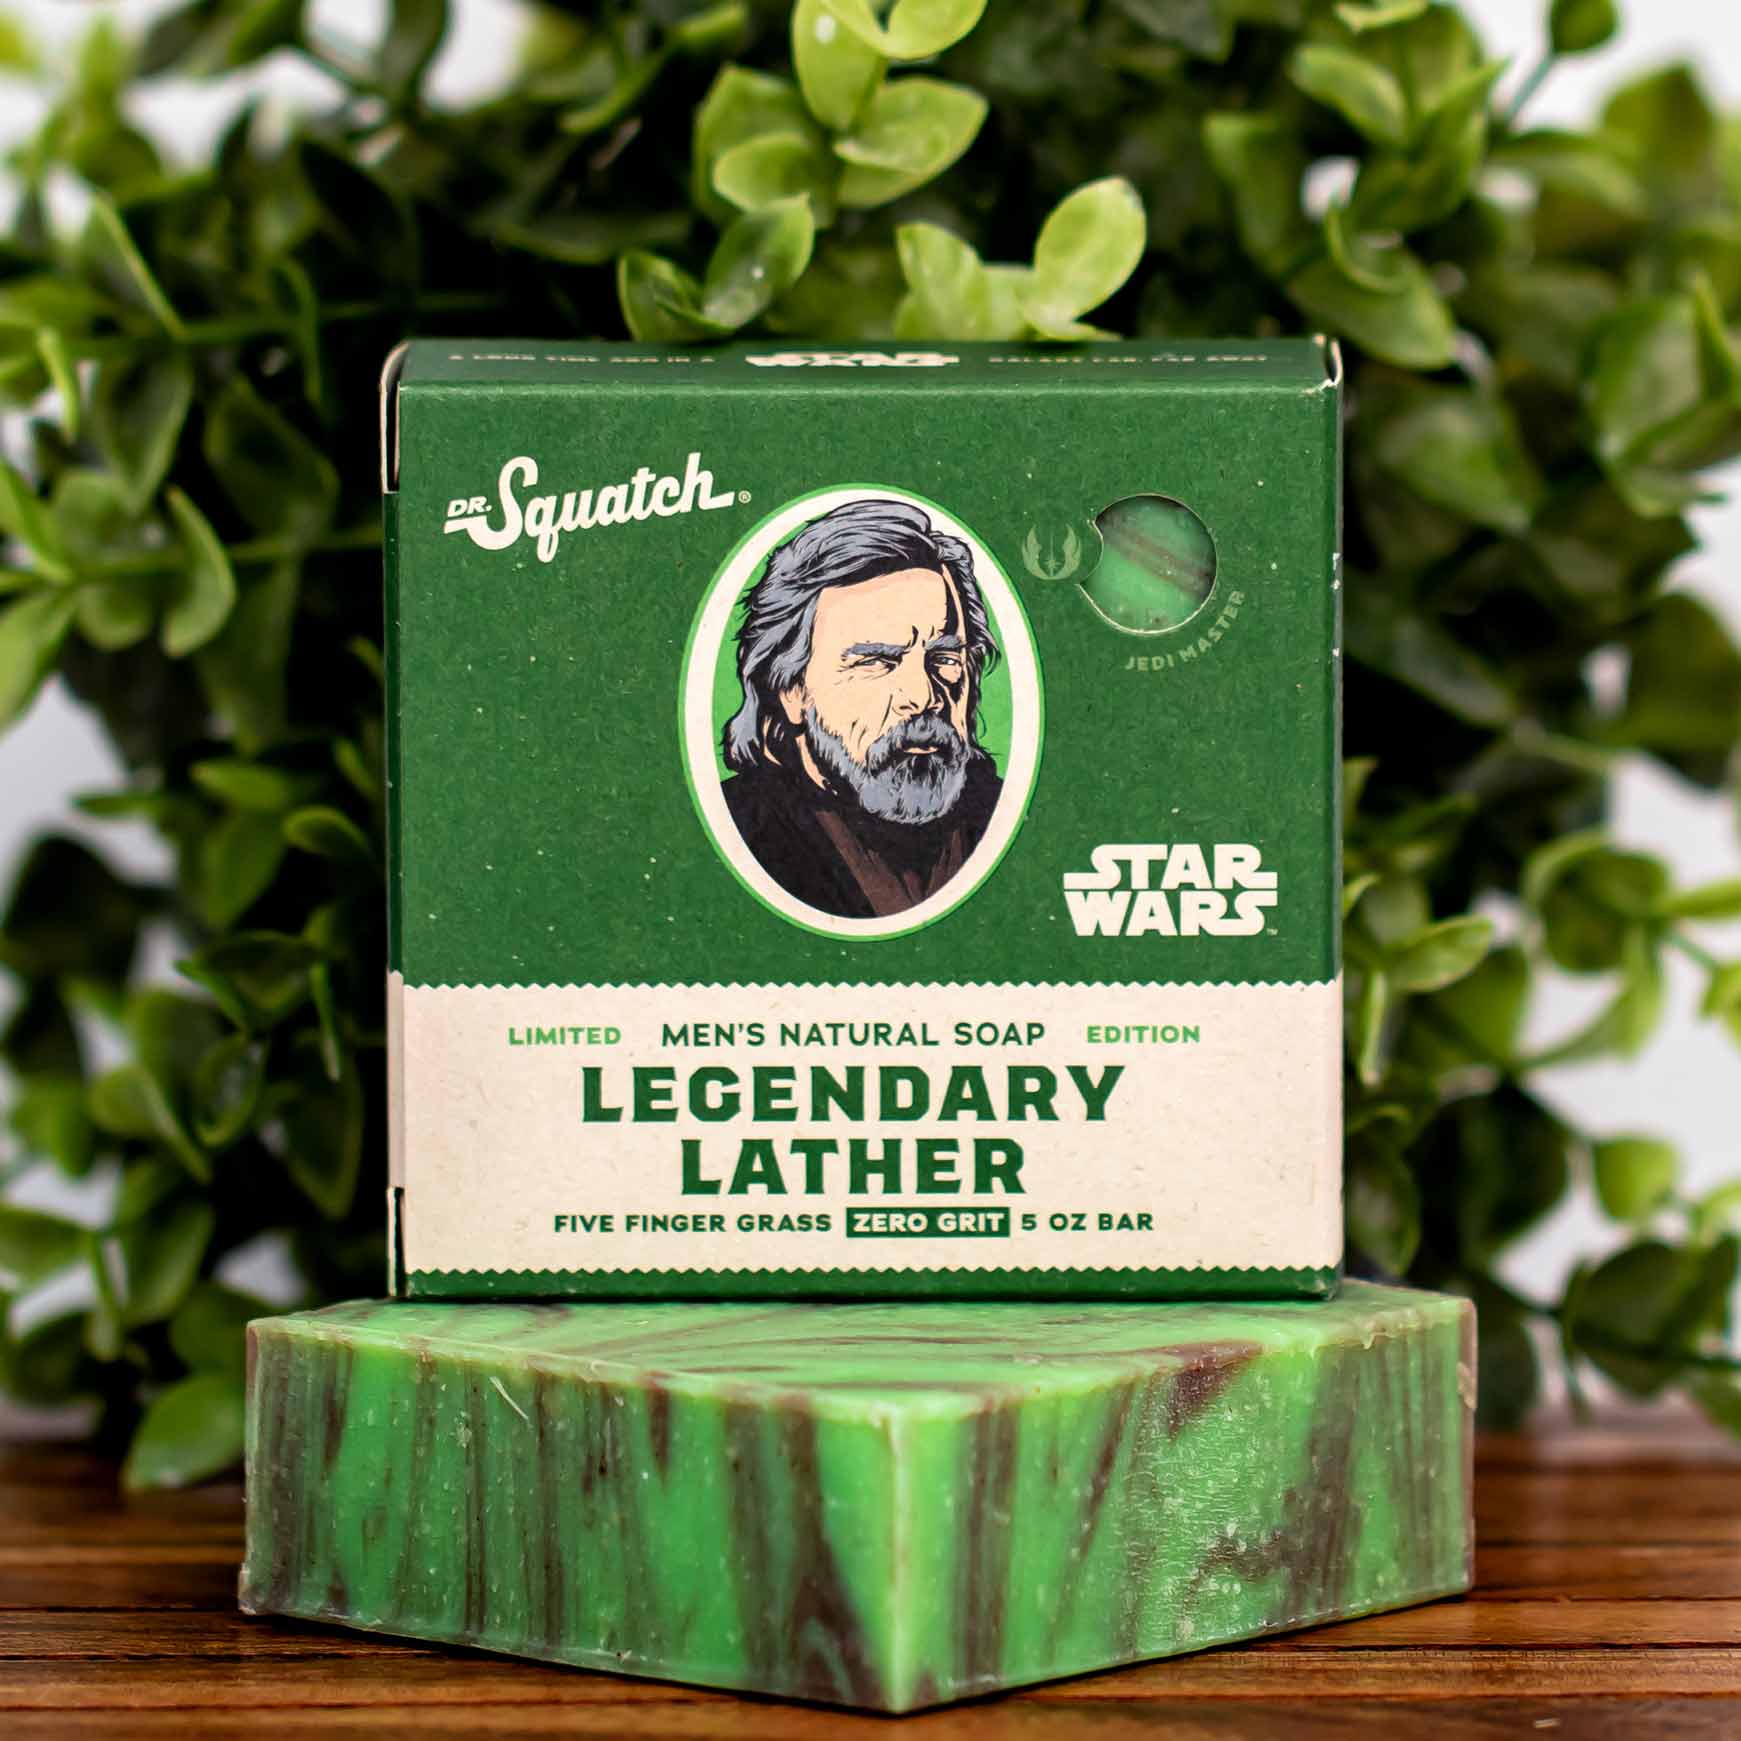 Original Star Wars Collection Dr. Squatch Limited Edition Soaps